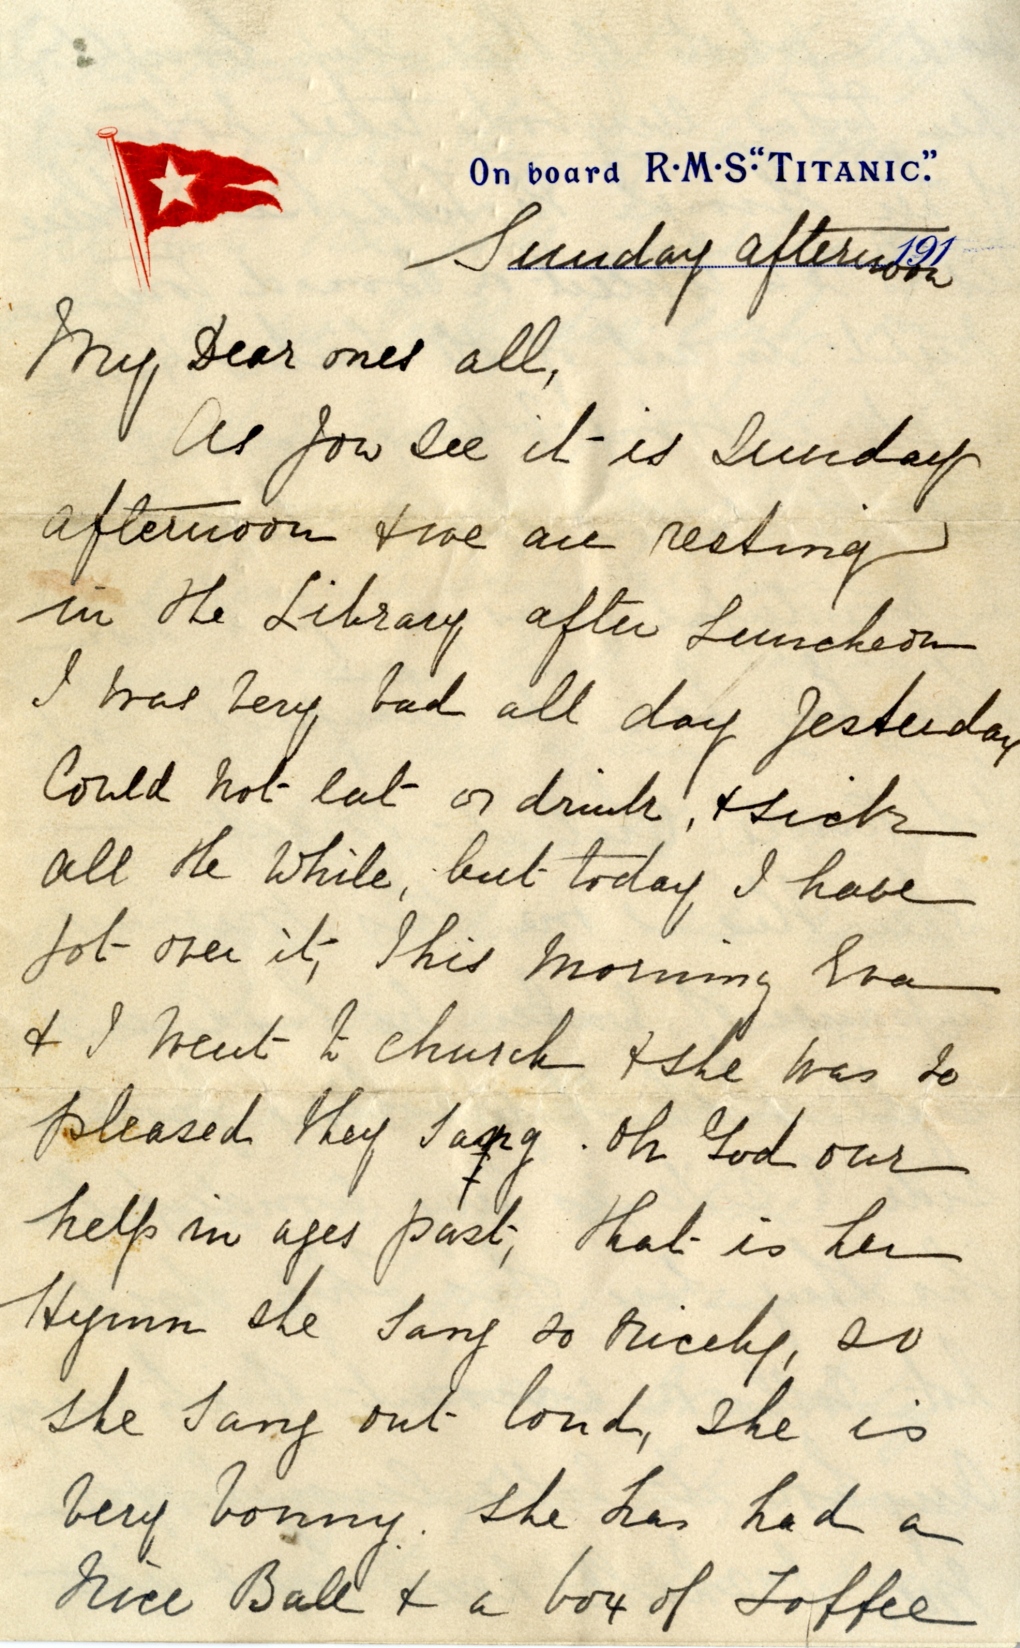 Rare Titanic letter to be auctioned